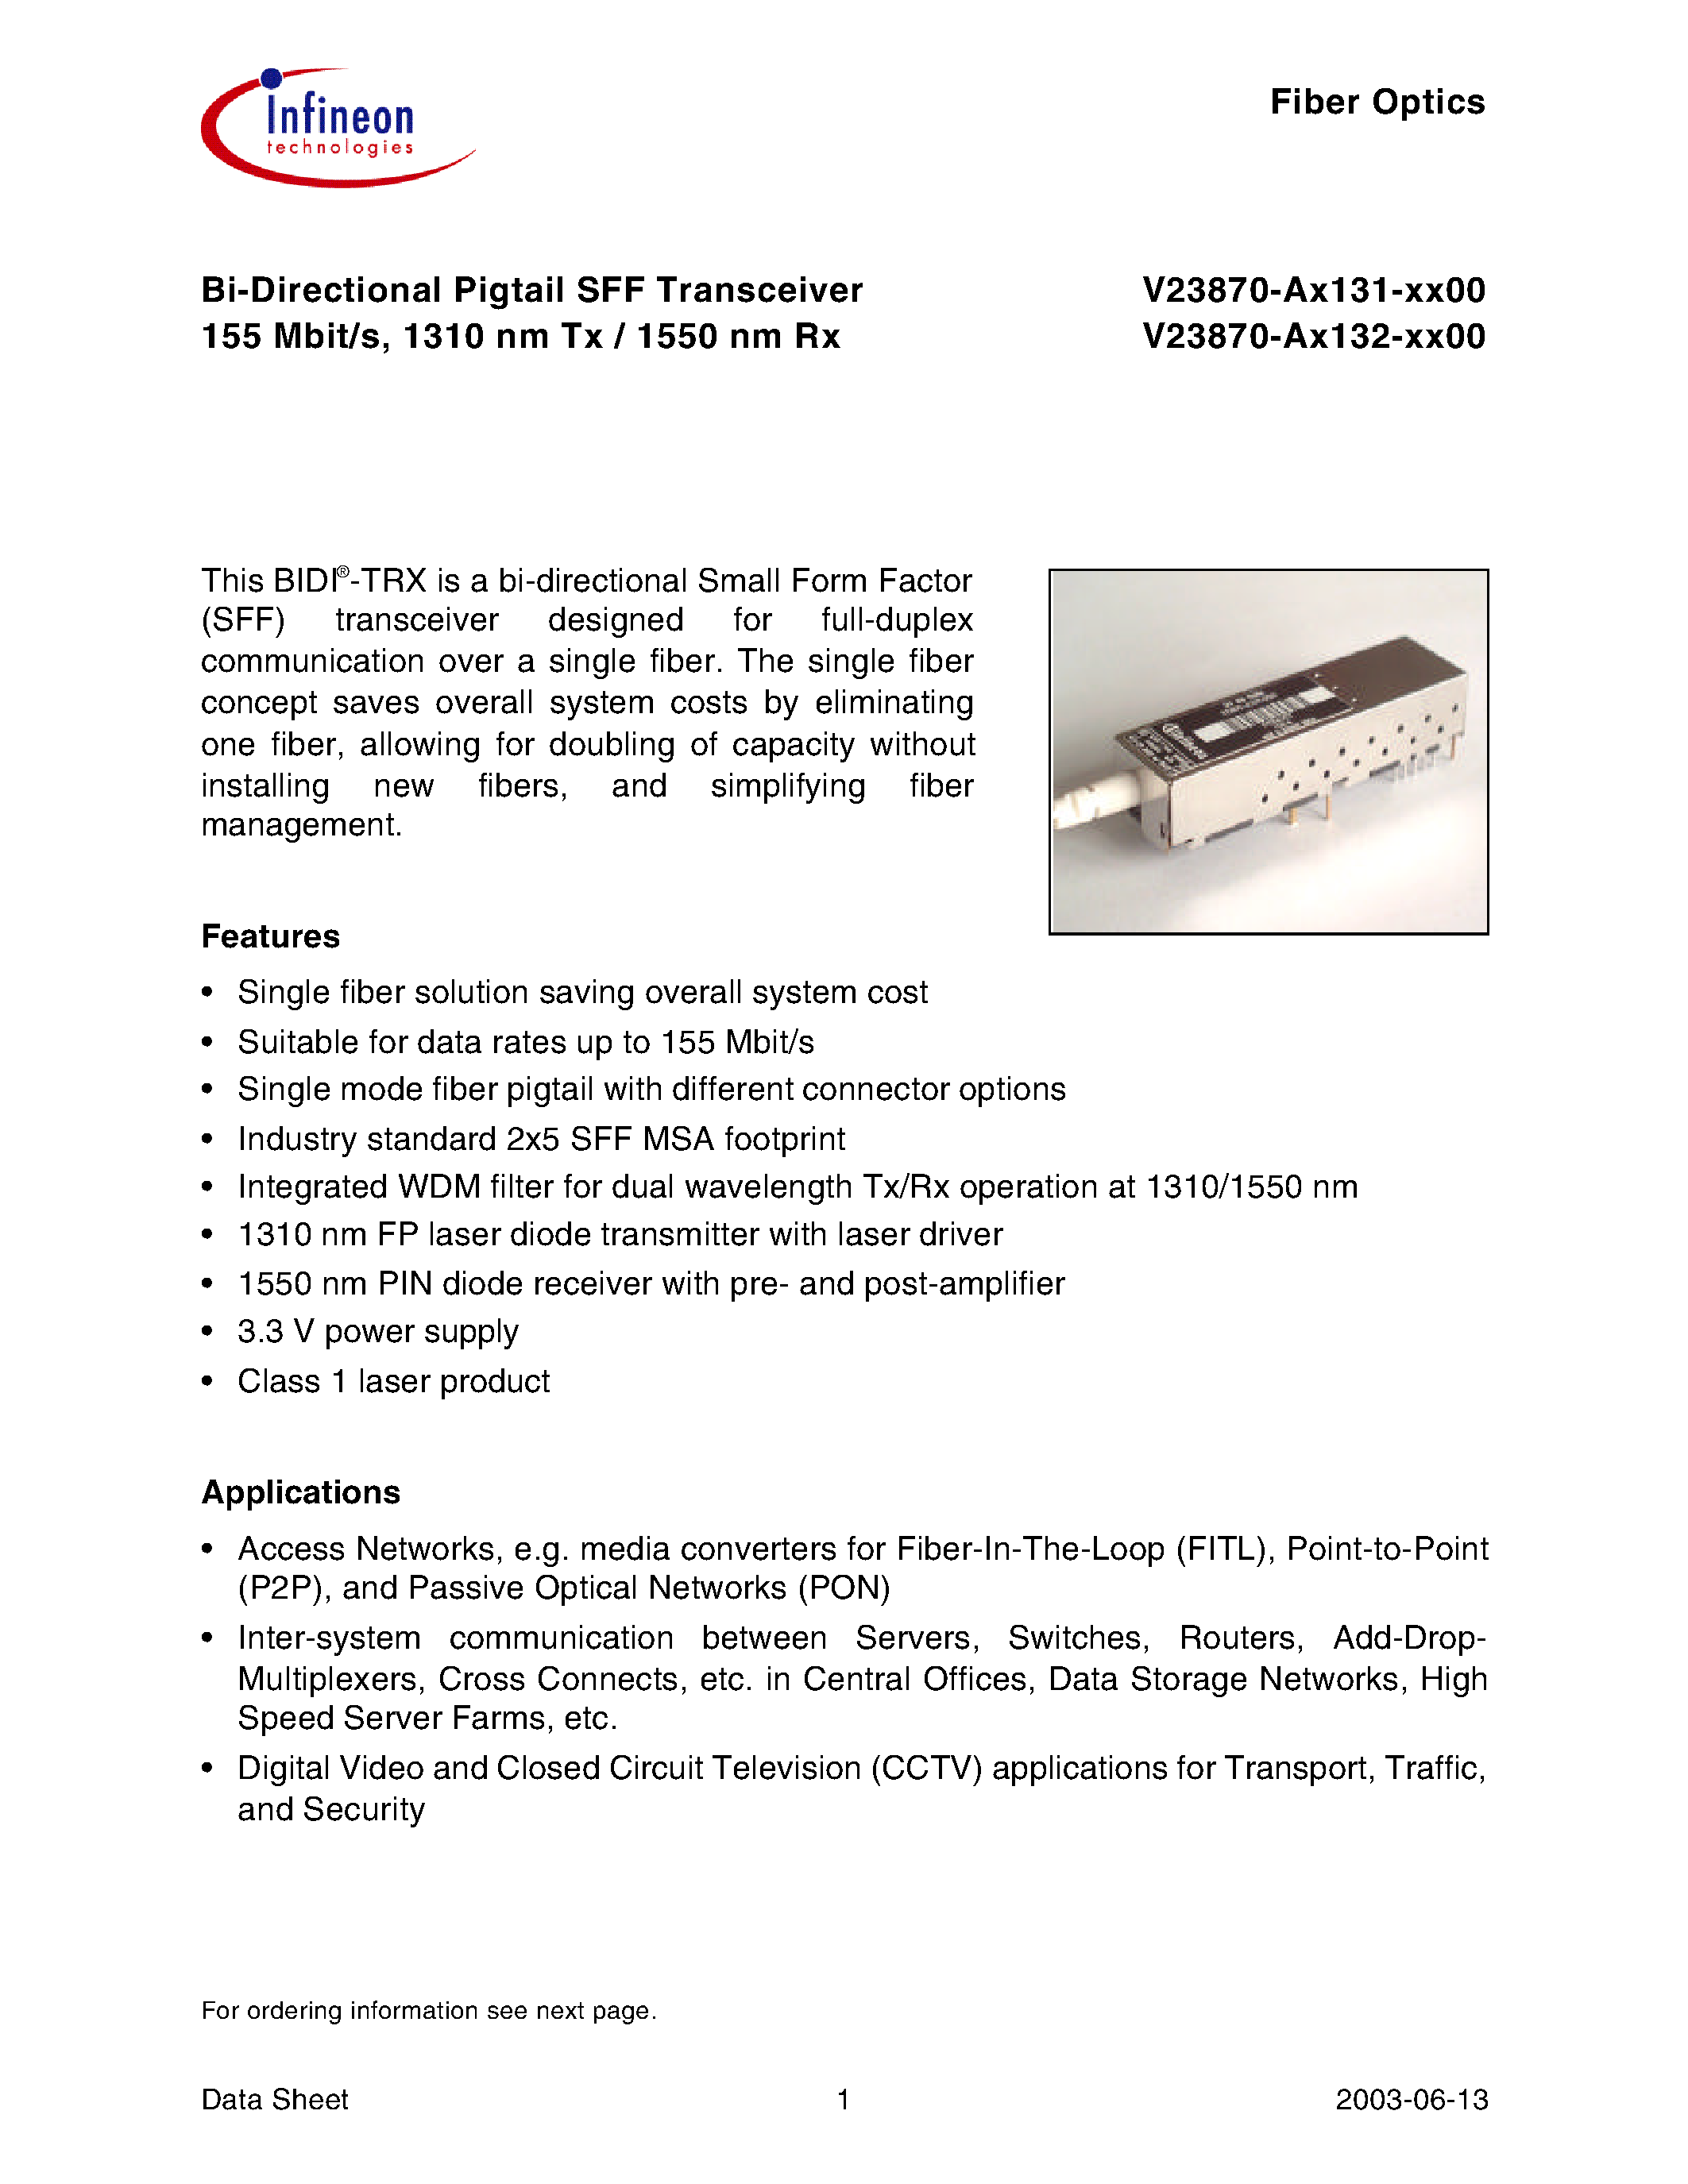 Datasheet V23870-A3132-B500 - Bi-Directional Pigtail SFF Transceiver 155 Mbit/s/ 1310 nm Tx / 1550 nm Rx page 1